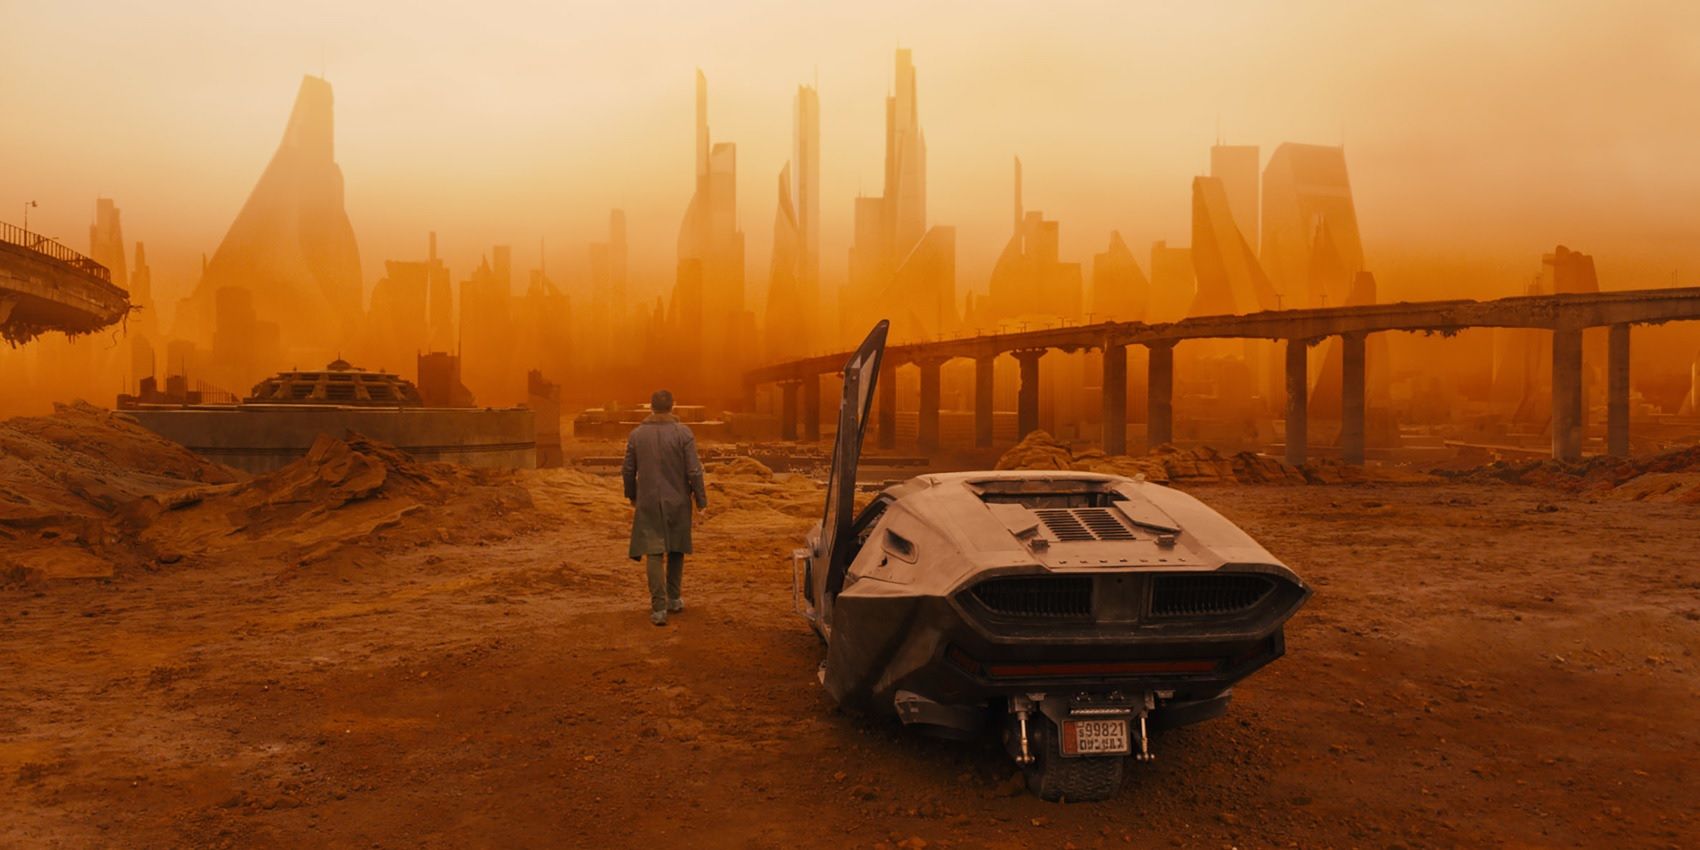 Officer K on a post-apocalyptic wasteland in Blade Runner 2049